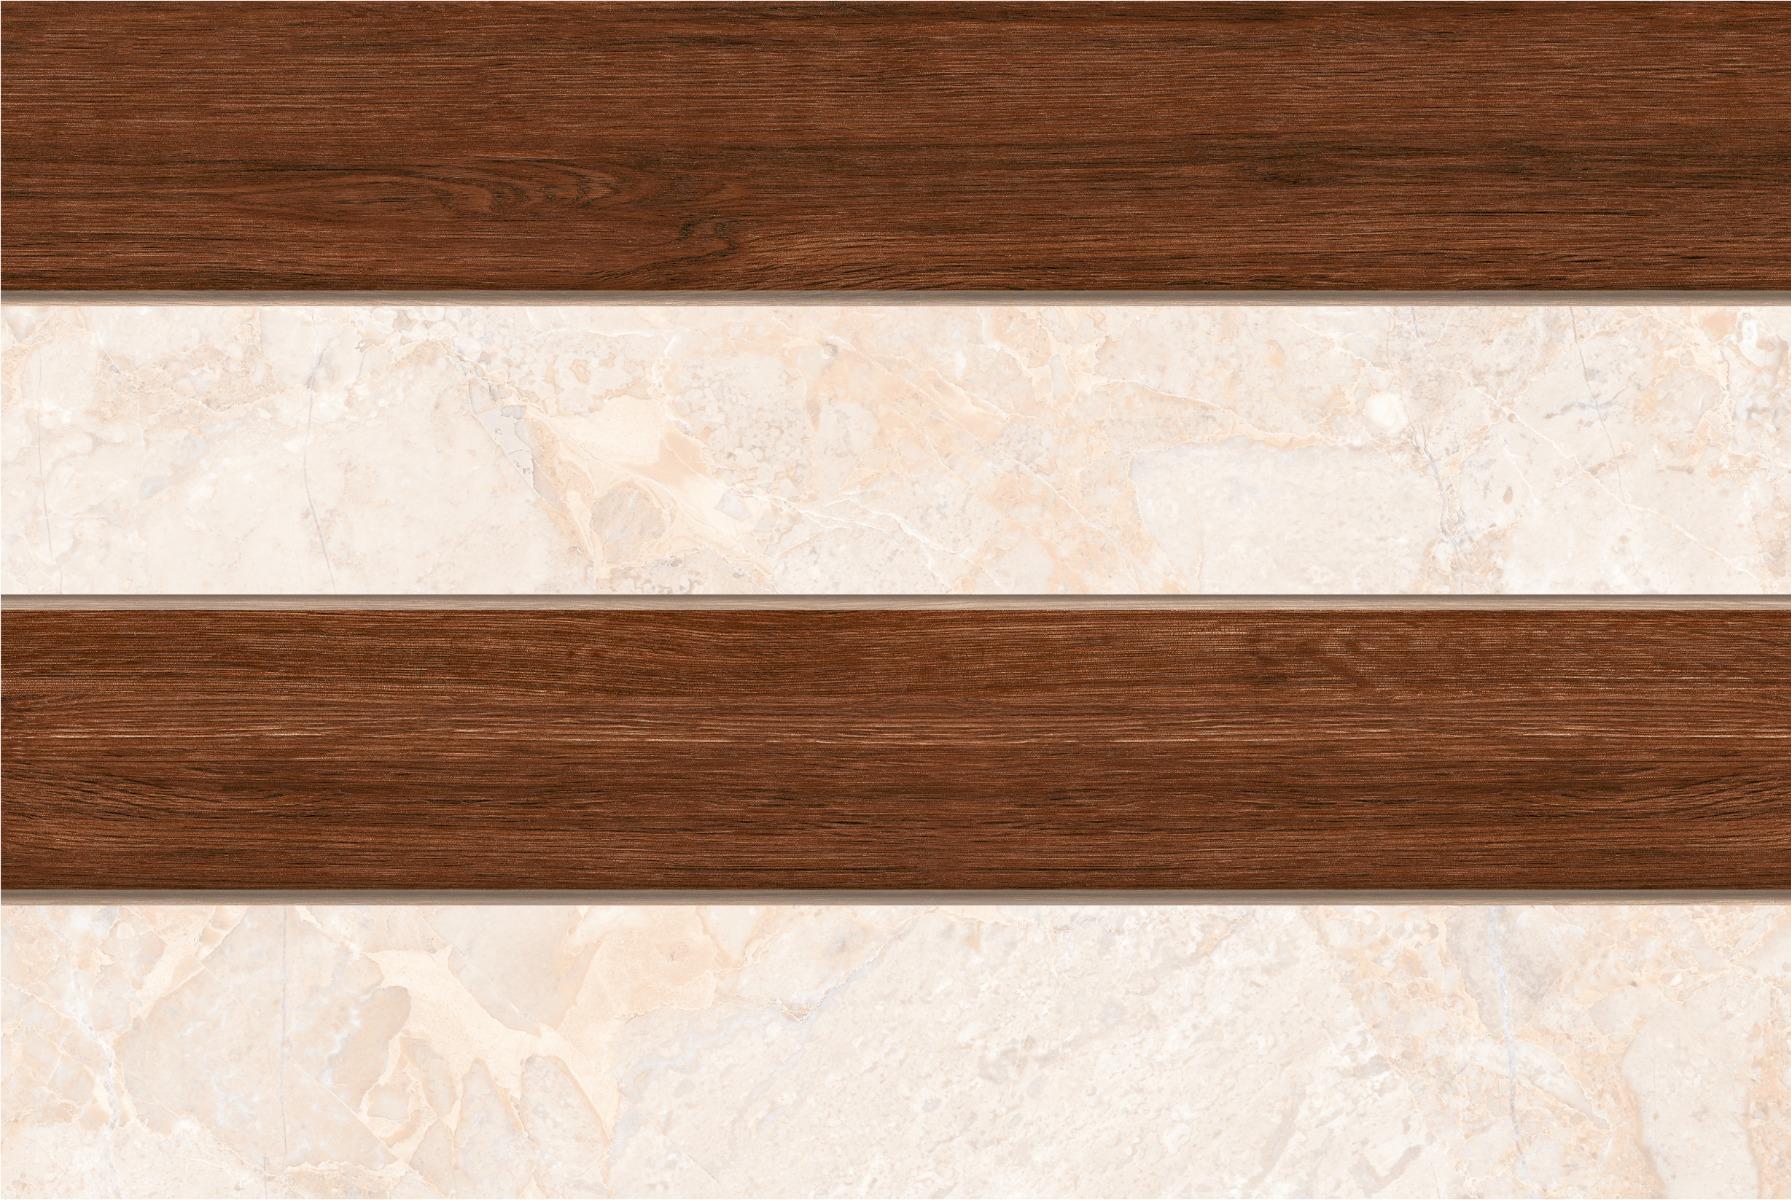 Brown Marble Tiles for Bathroom Tiles, Kitchen Tiles, Accent Tiles, Dining Room Tiles